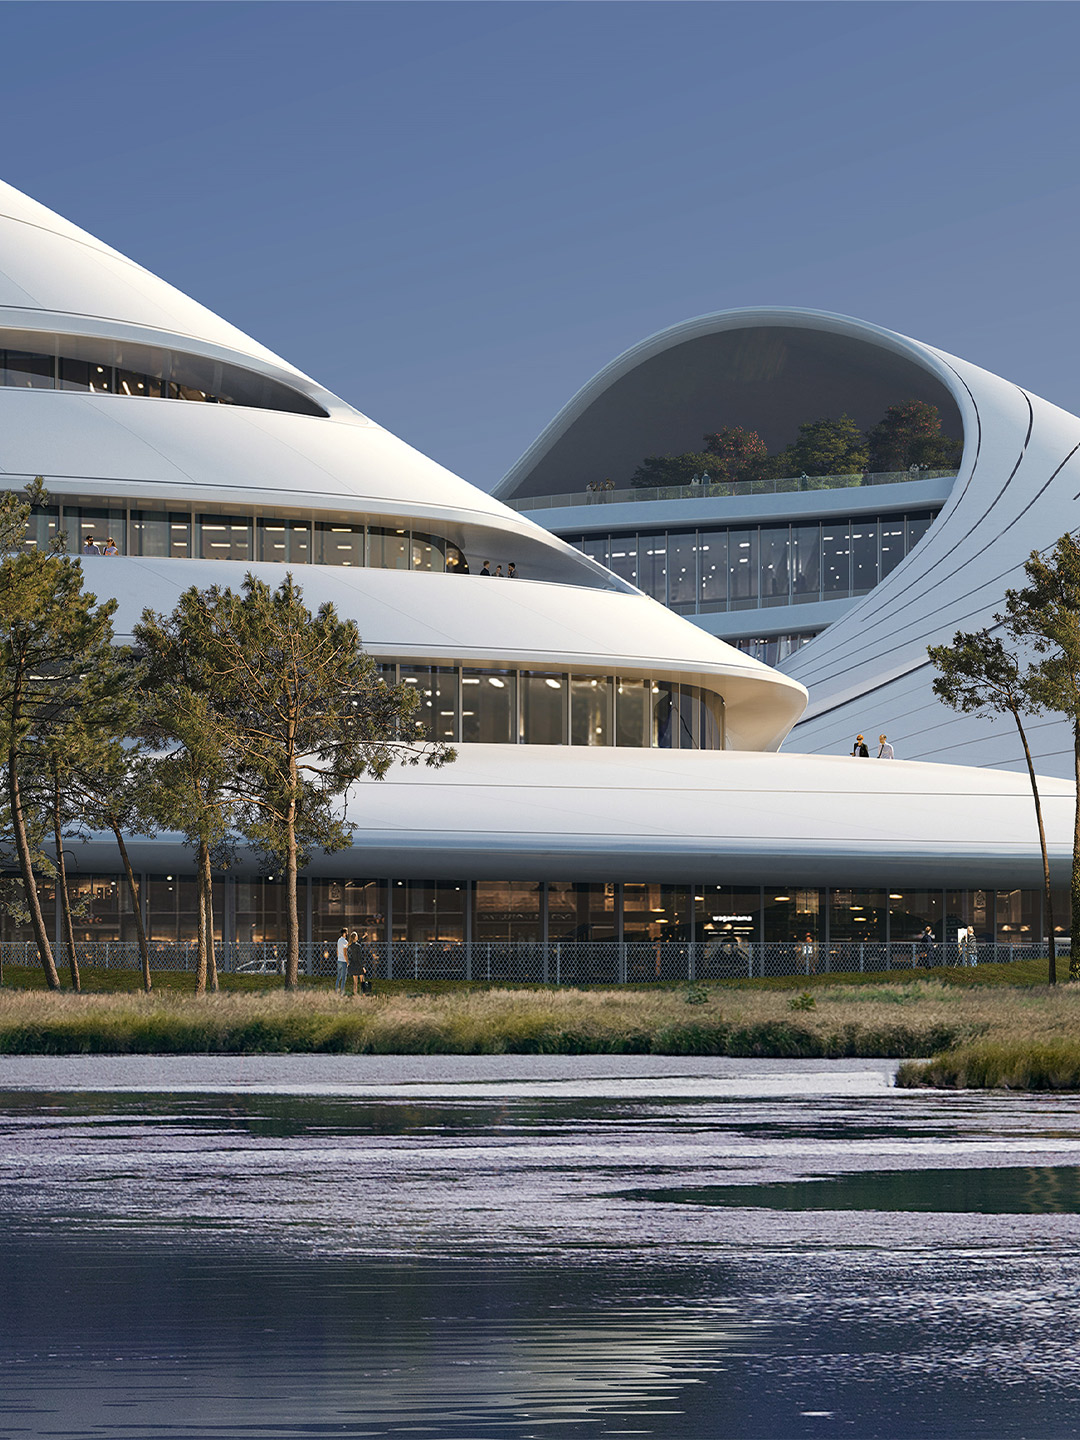 Jiaxing Civic Centre in China by MAD Architects